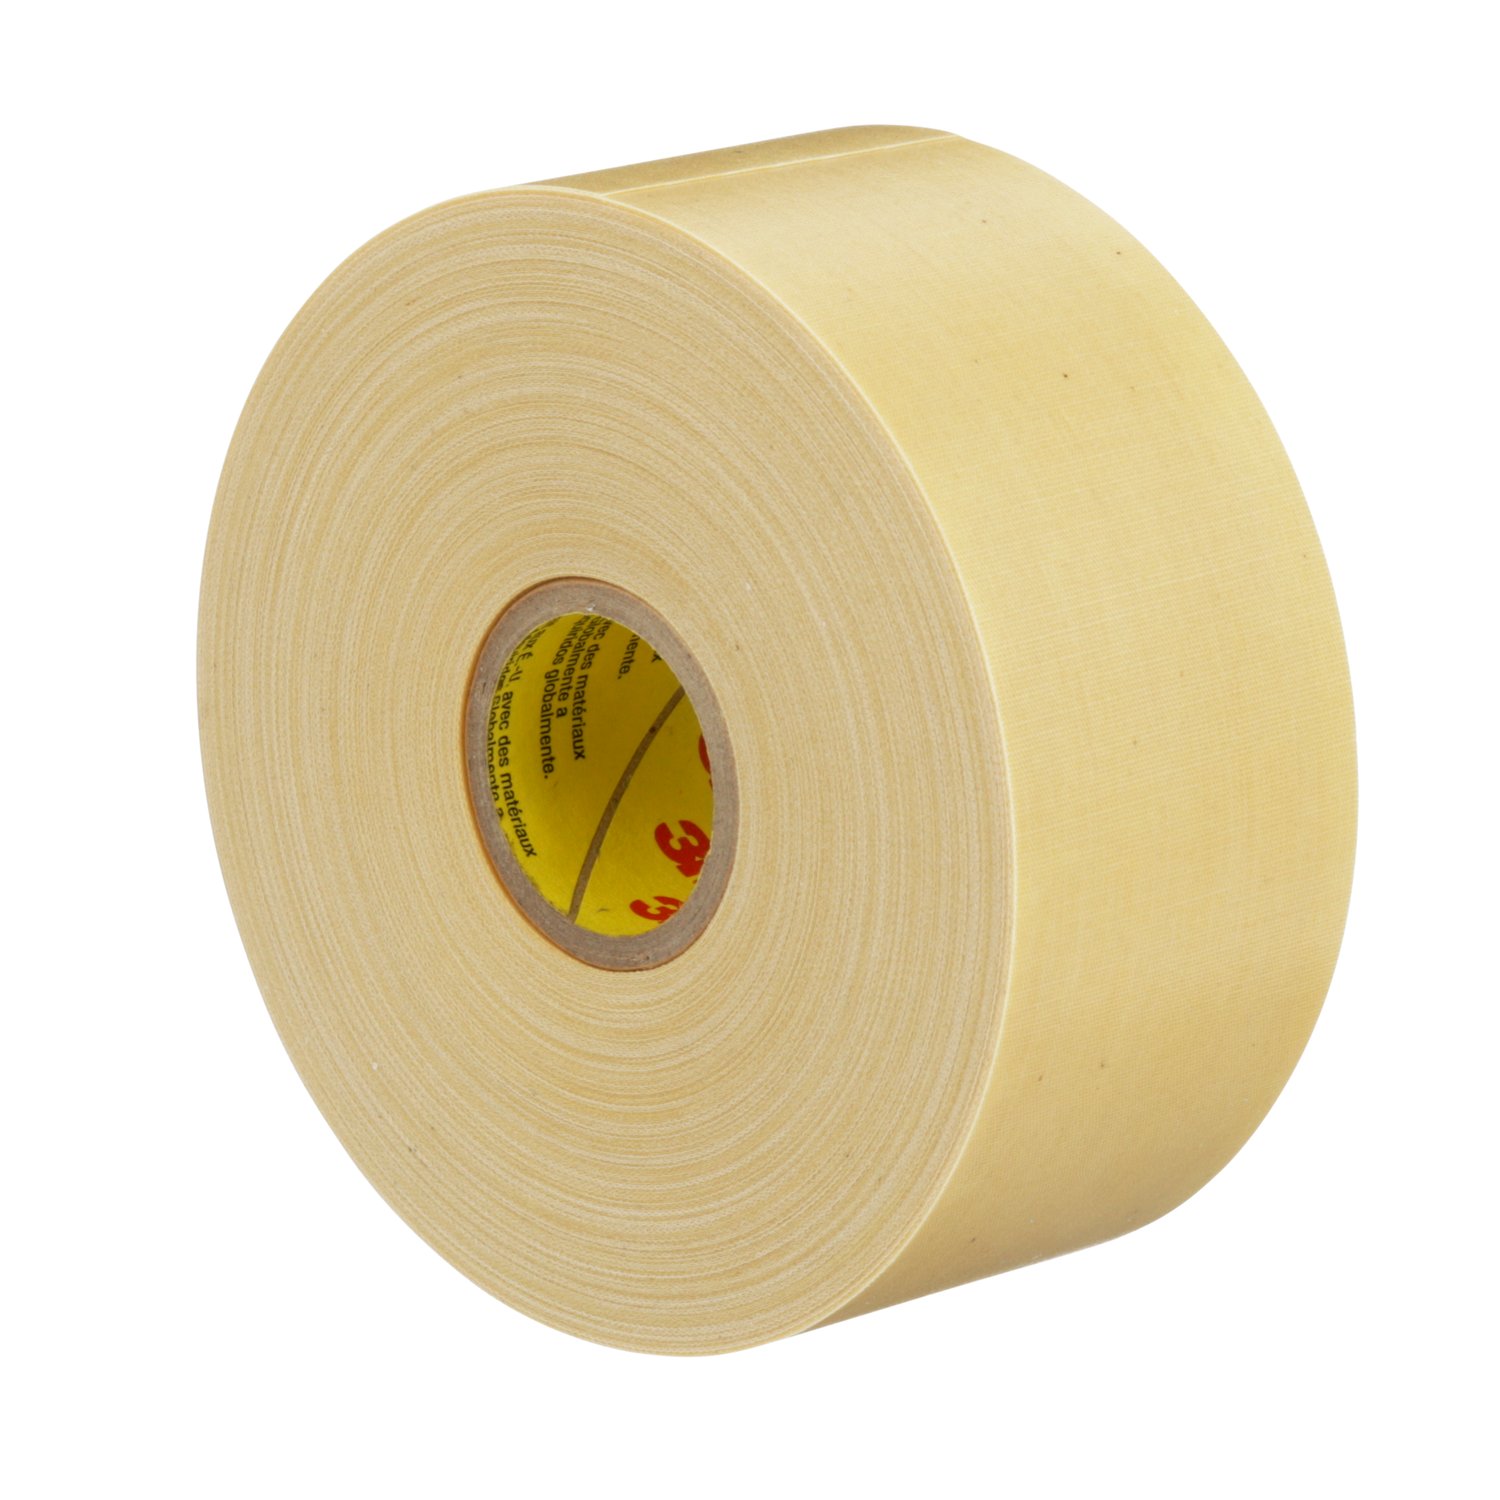 7000132812 - Scotch Varnished Cambric Tape 2520, 1-1/2 in x 36 yd, Yellow, 6
rolls/carton, 24 rolls/Case